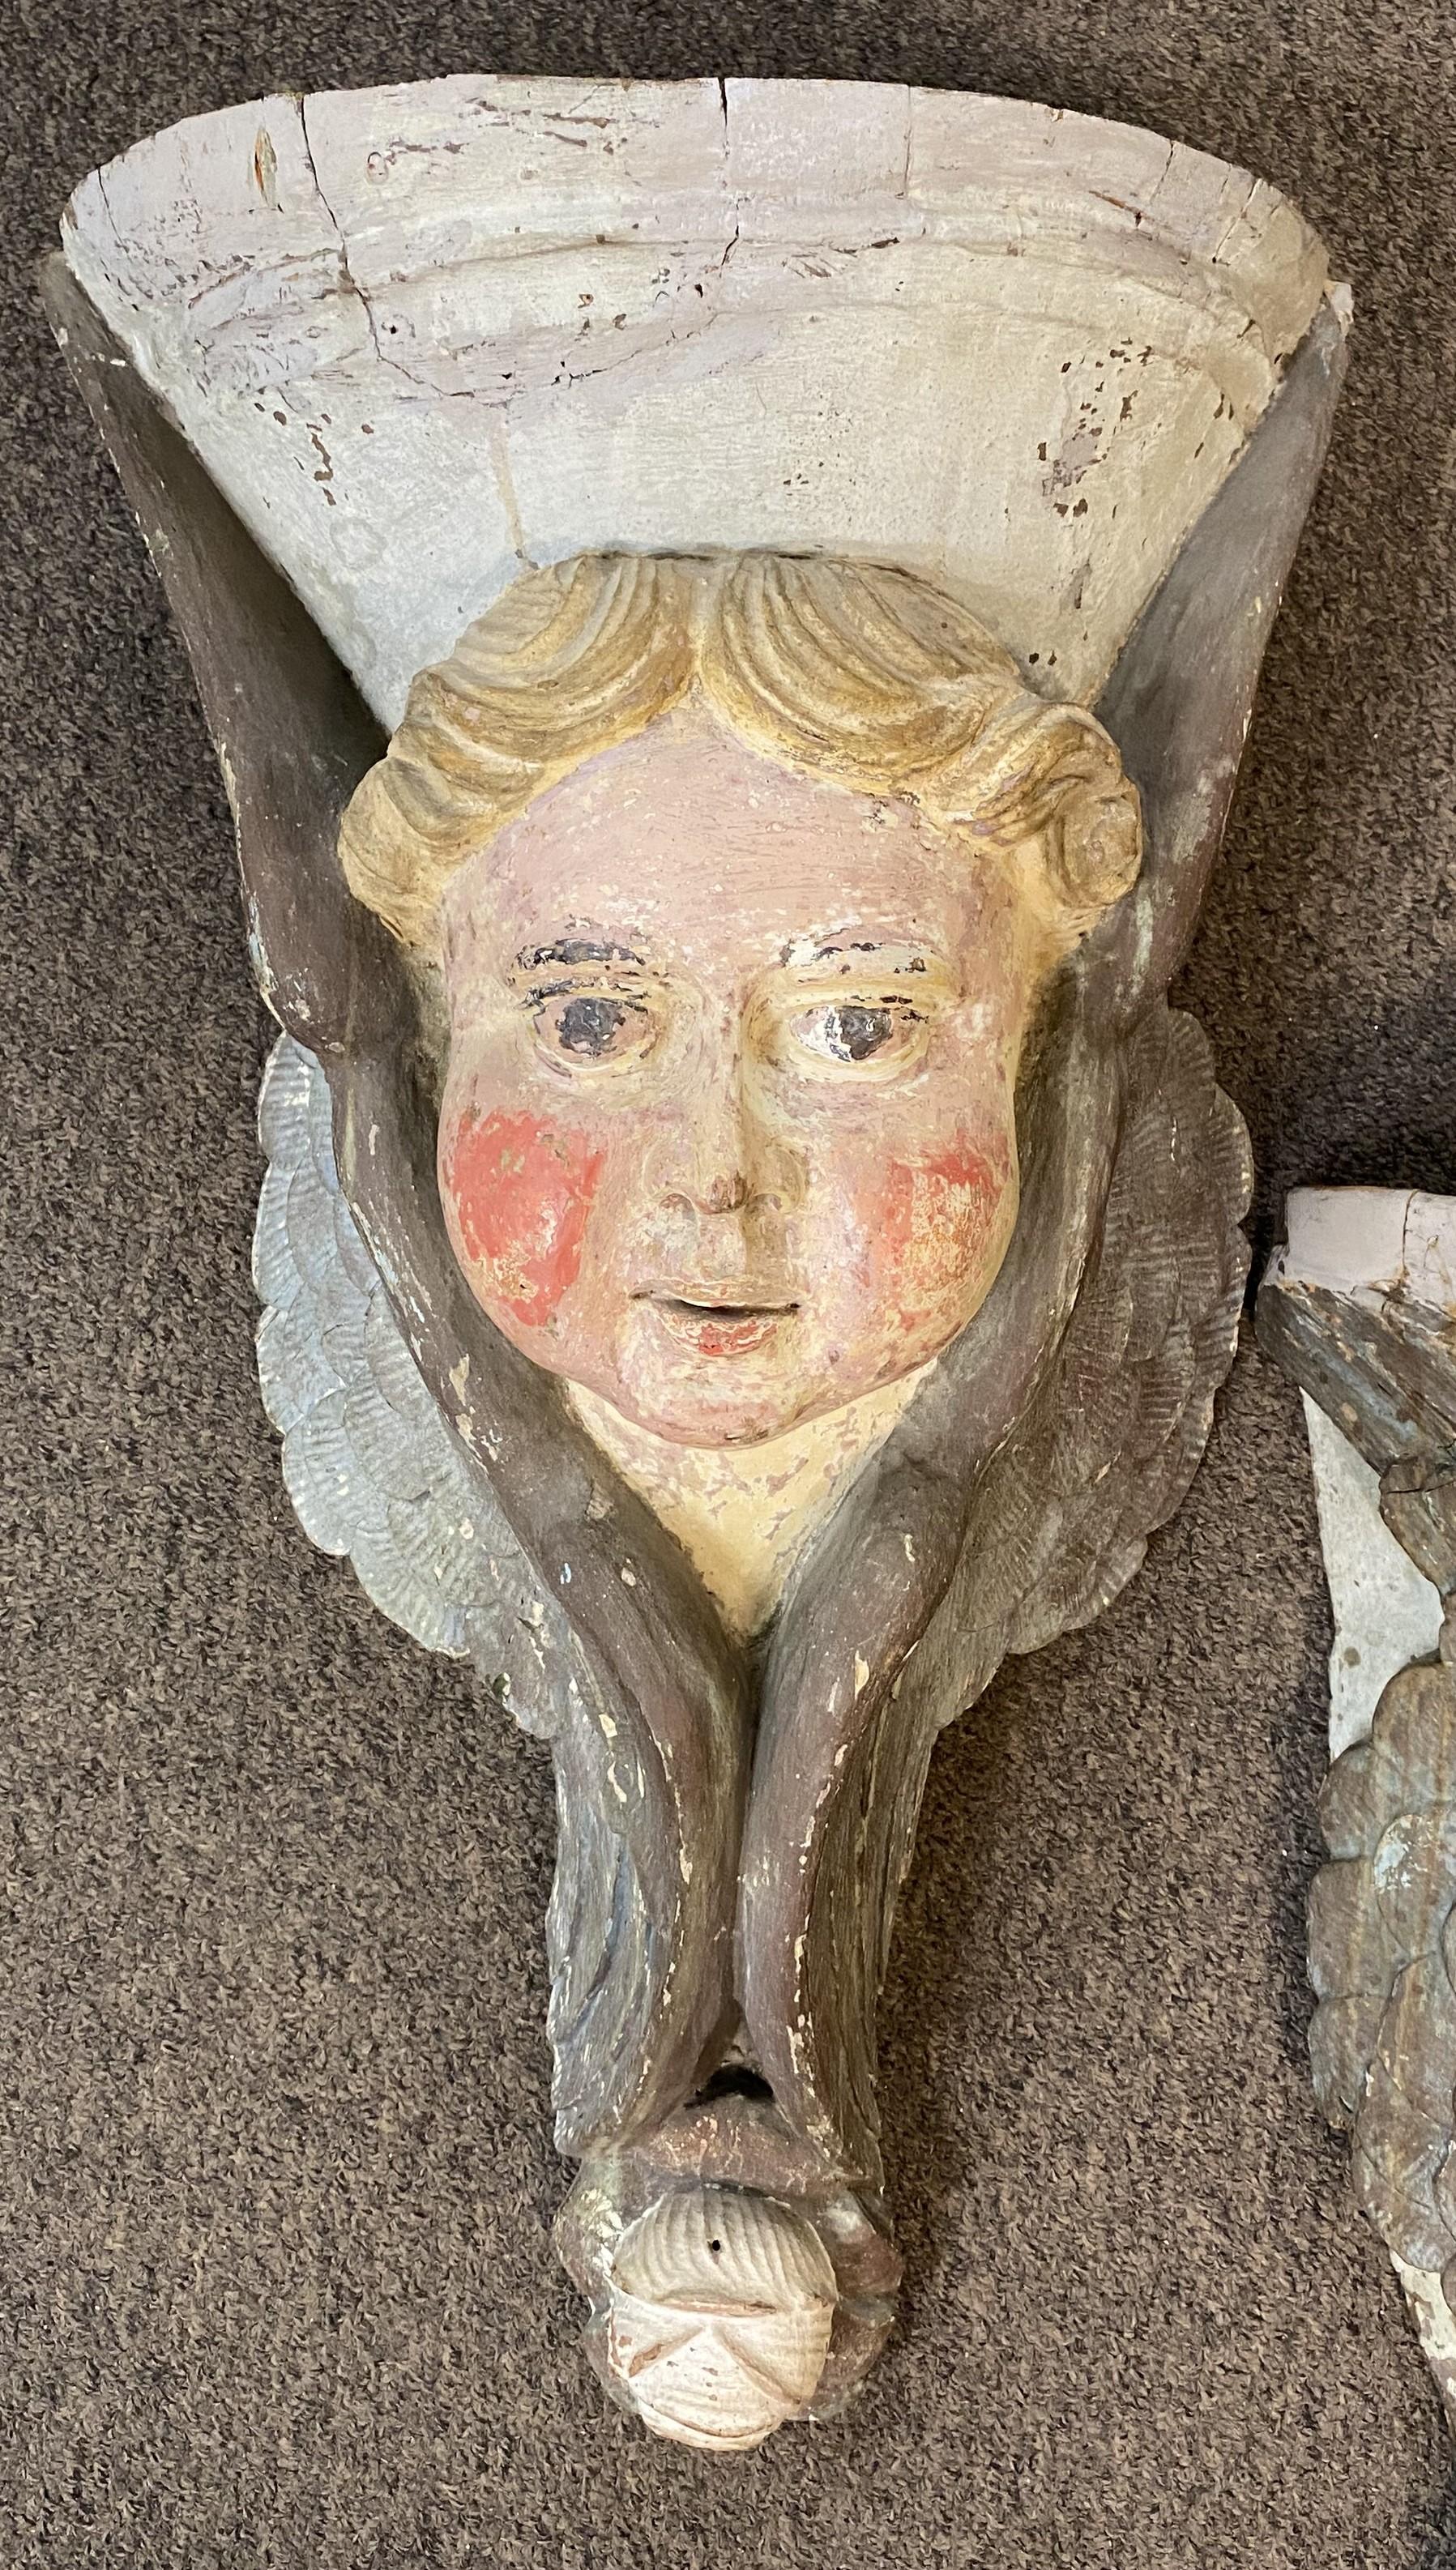 A fine pair of Continental wooden polychrome figural wall appliqués or brackets with cherub faces adorned with side wings, each hand carved from a single piece of wood, probably dating to the 19th century. Very good overall condition, with some edge